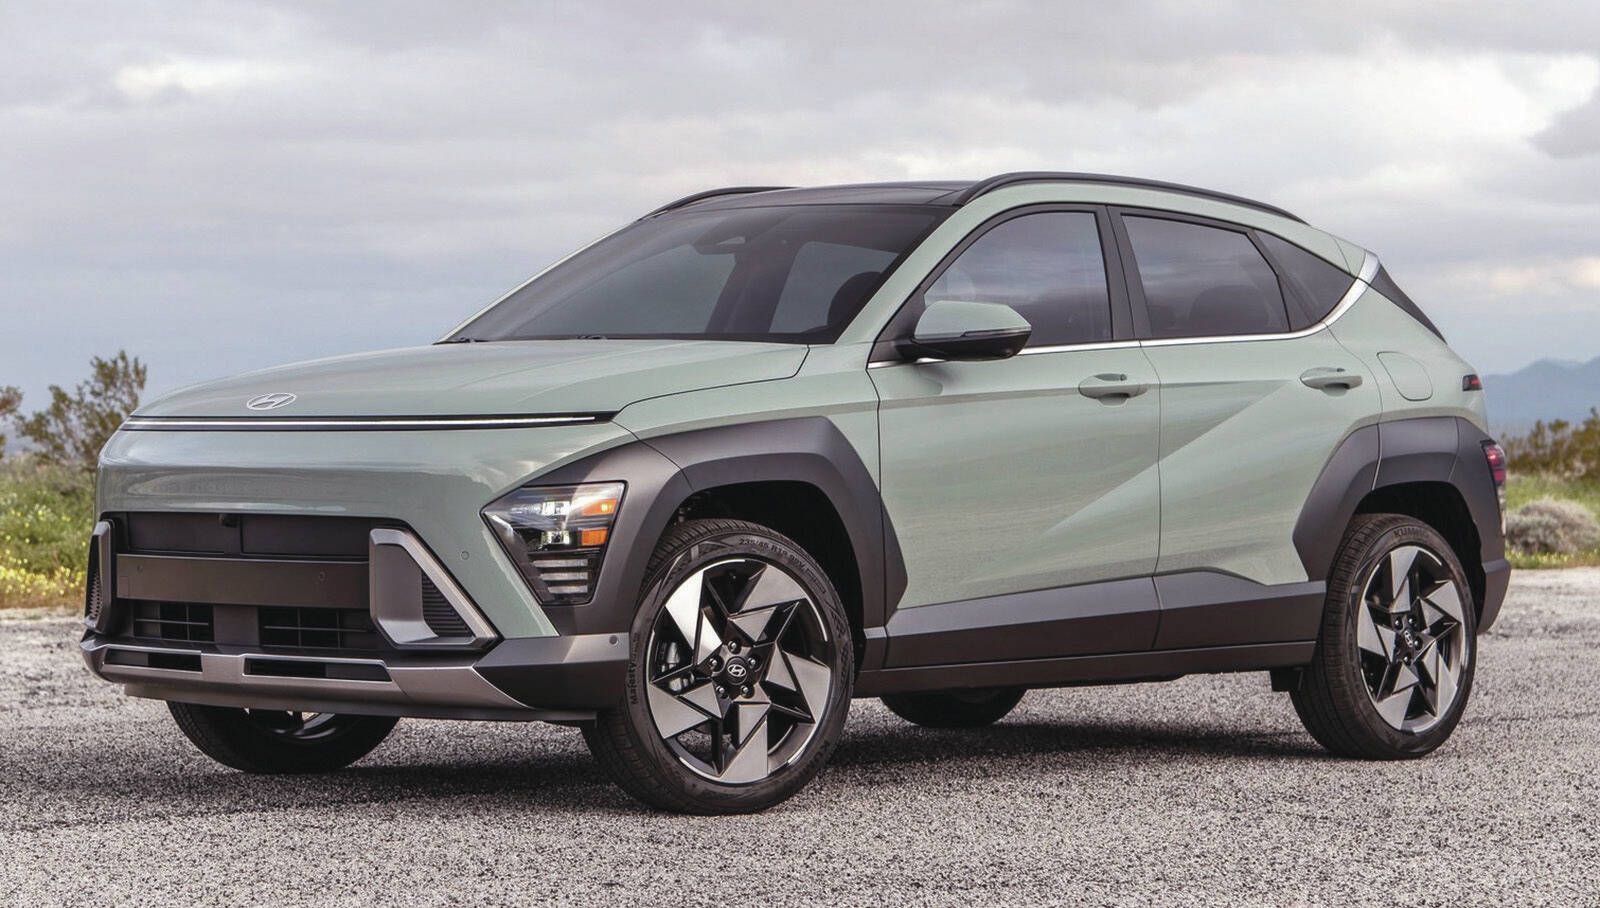 The Hyundai Kona will be available with a choice of two different internal-combustion engines or battery power (two capacities). PHOTO: HYUNDAI